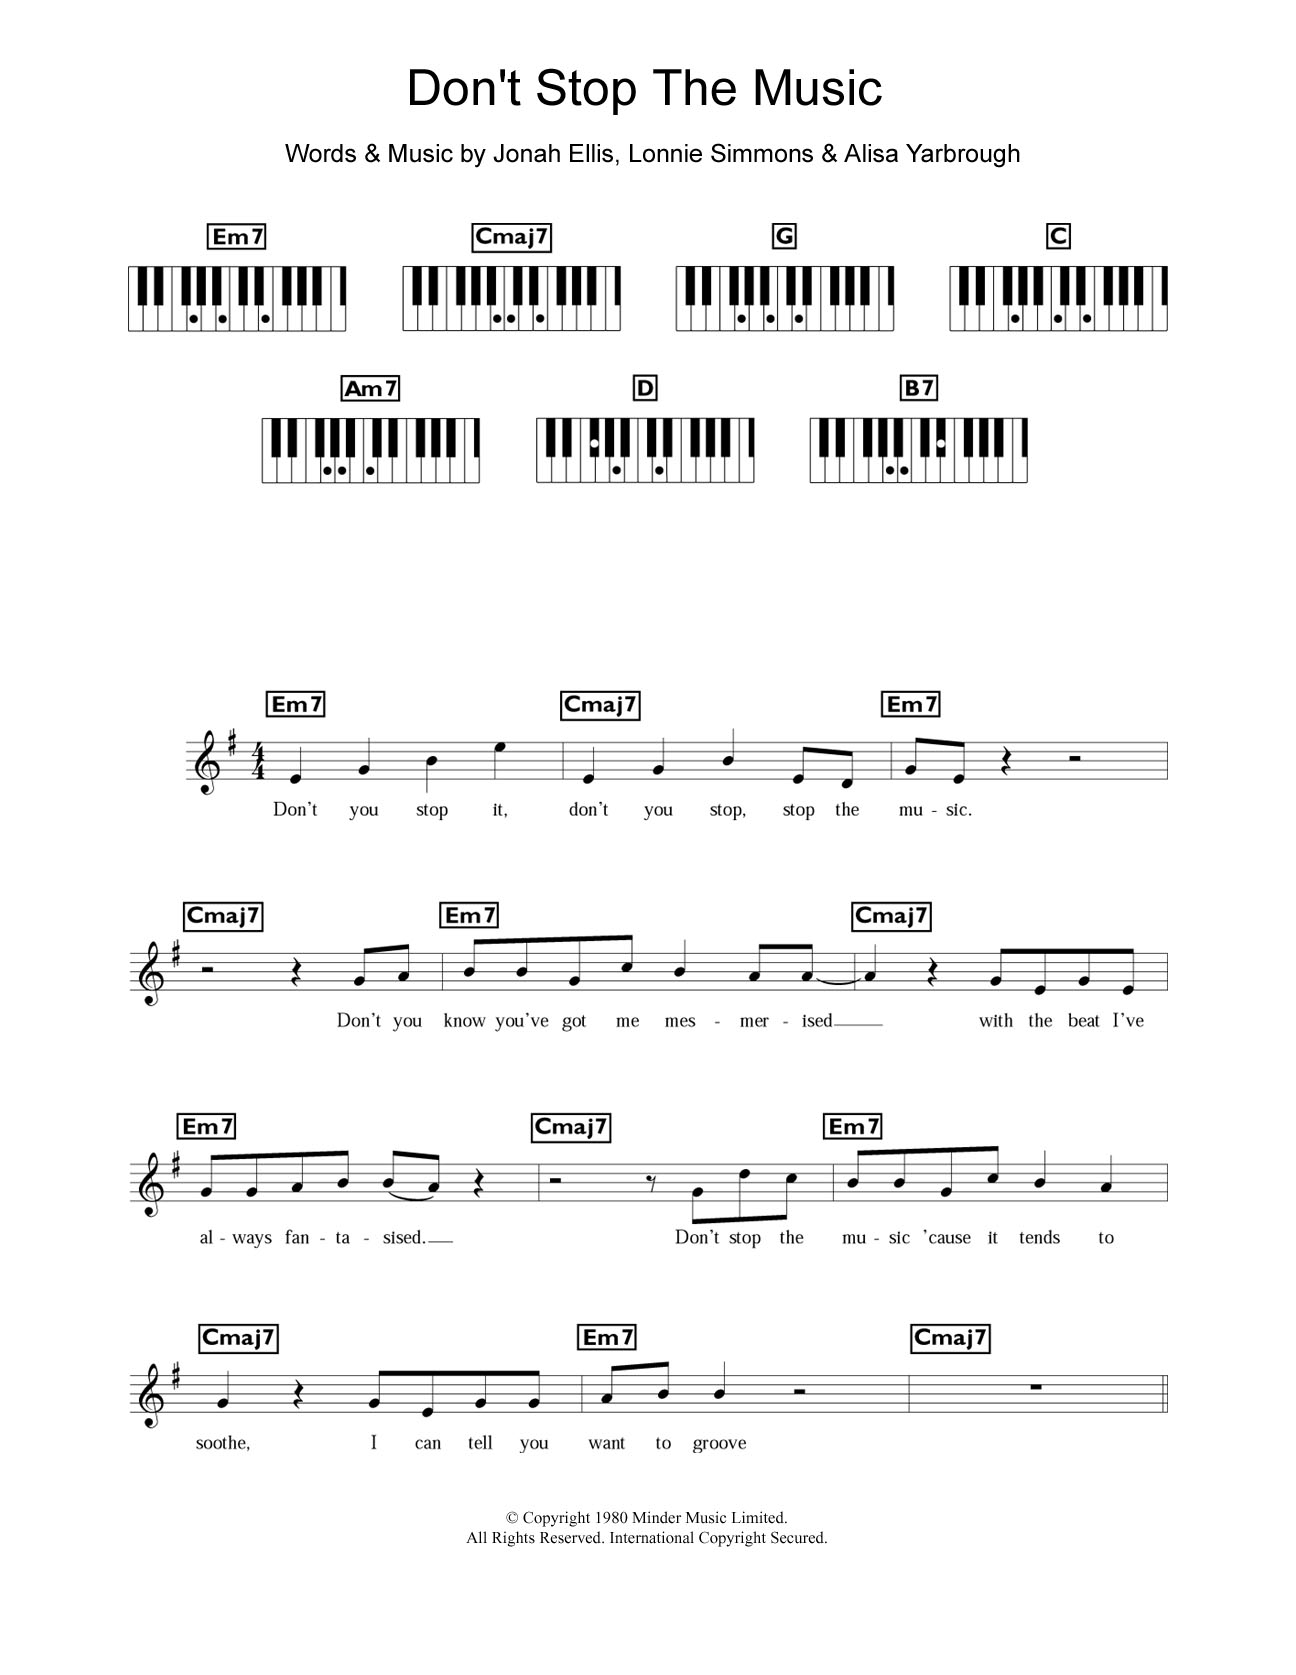 Download Yarbrough and Peoples Don't Stop The Music Sheet Music